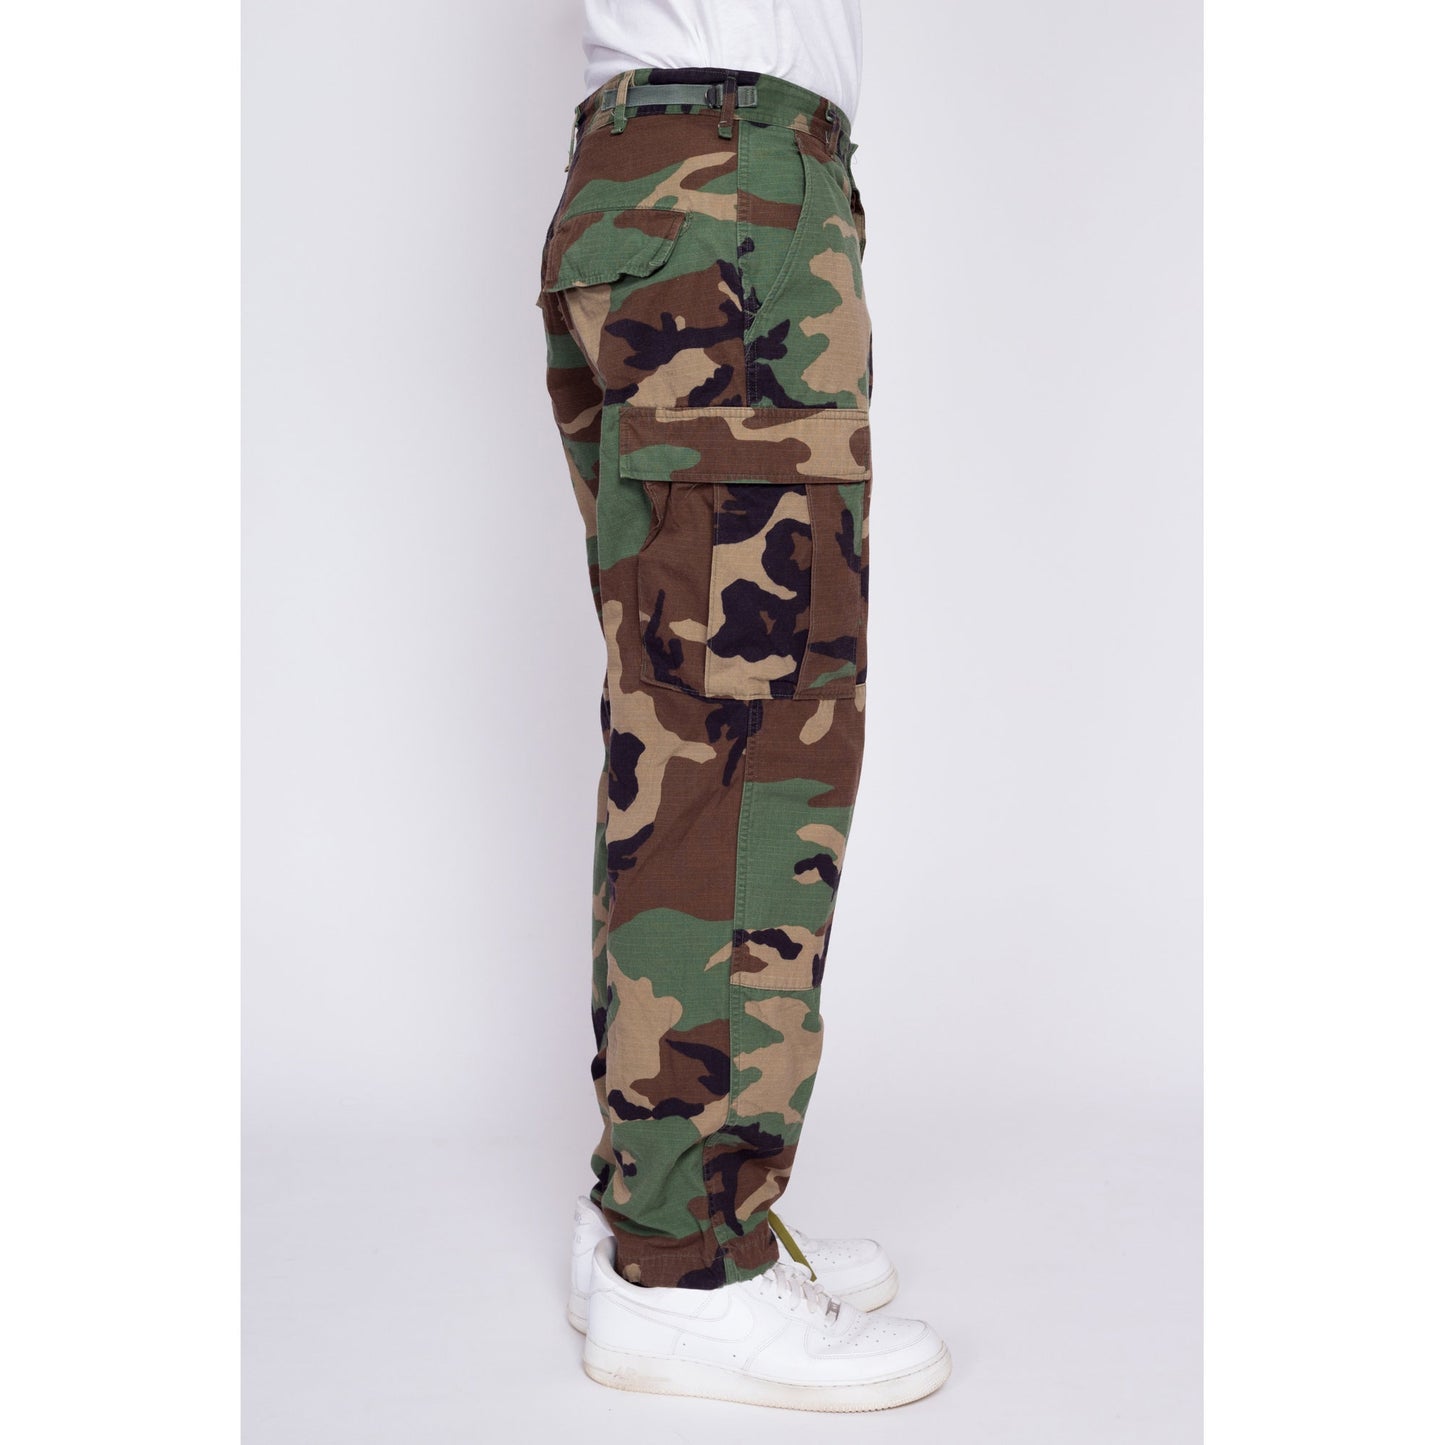 Vintage Camo Cargo Field Pants - 25"-30" Waist | Unisex Military Olive Drab Camouflage Army Trousers